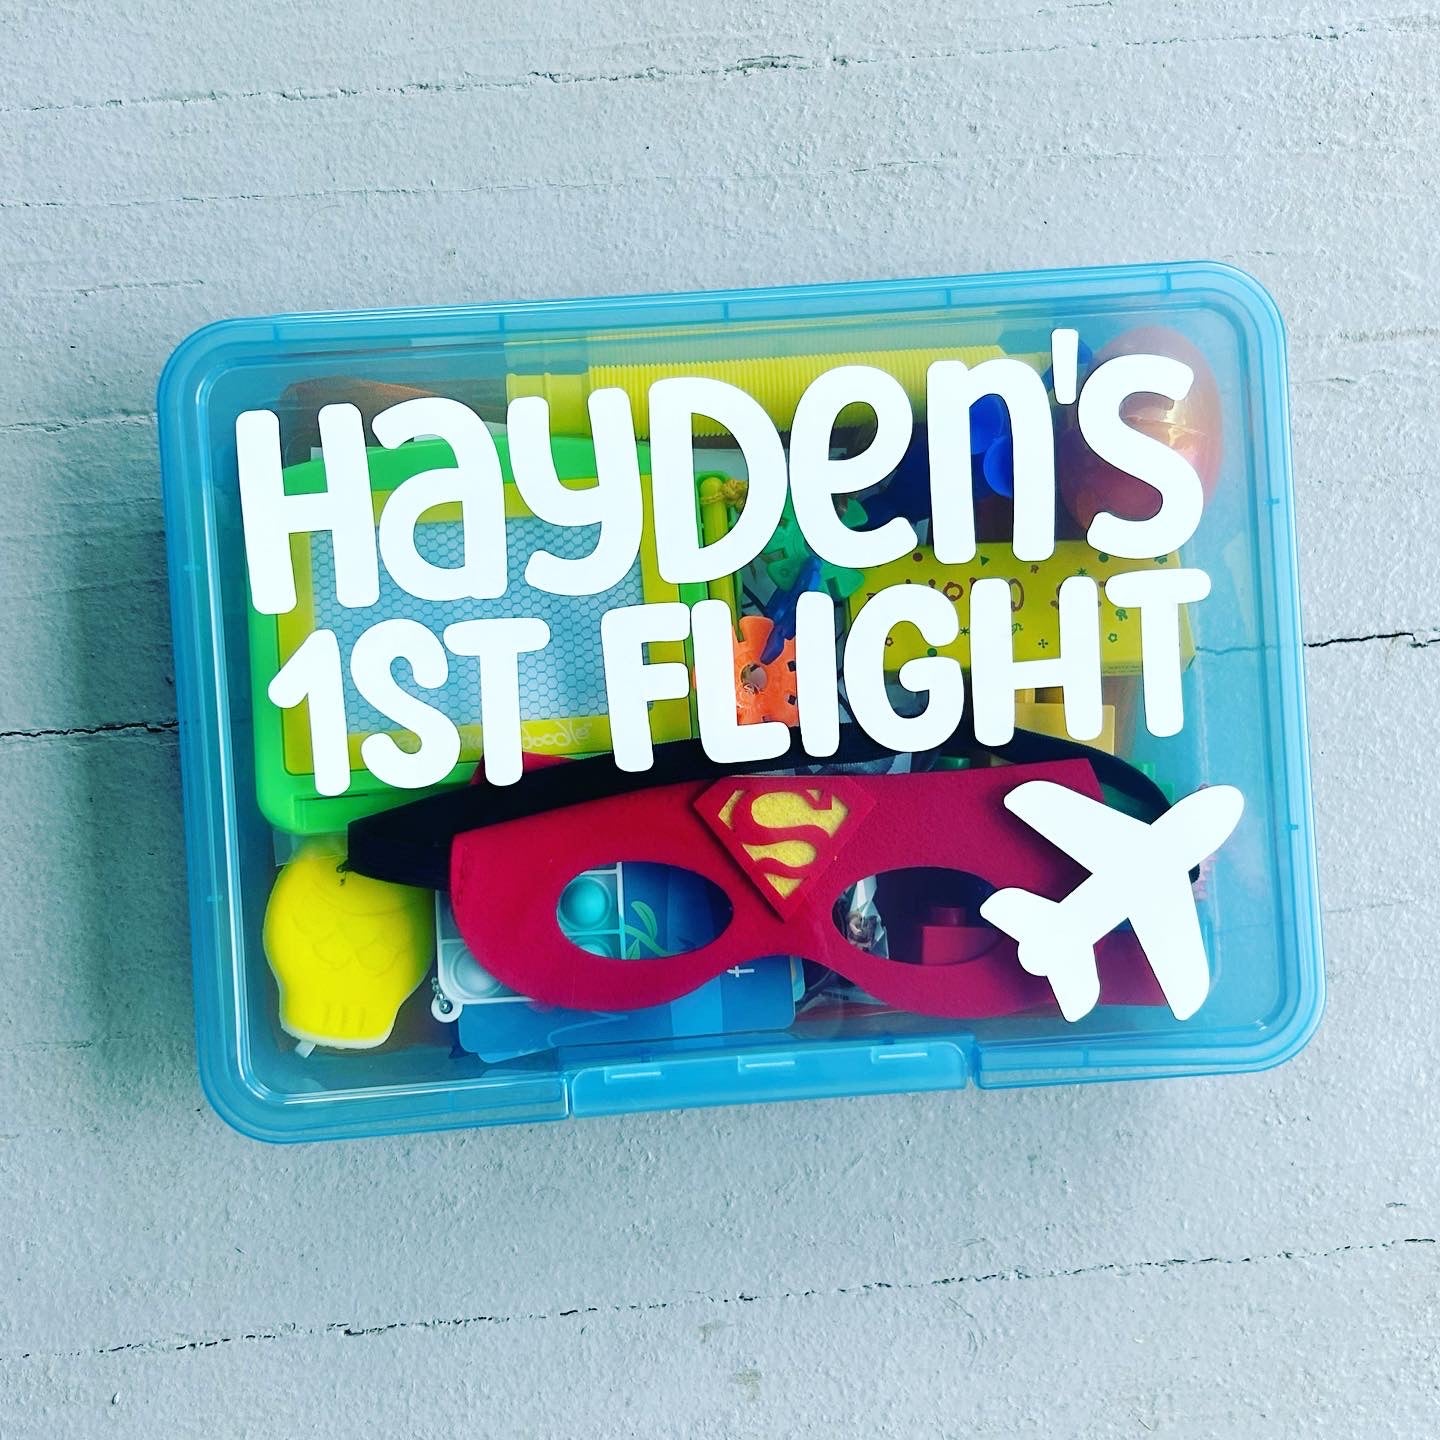 Airplane Activities - Travel Busy Box – 2+3=WE